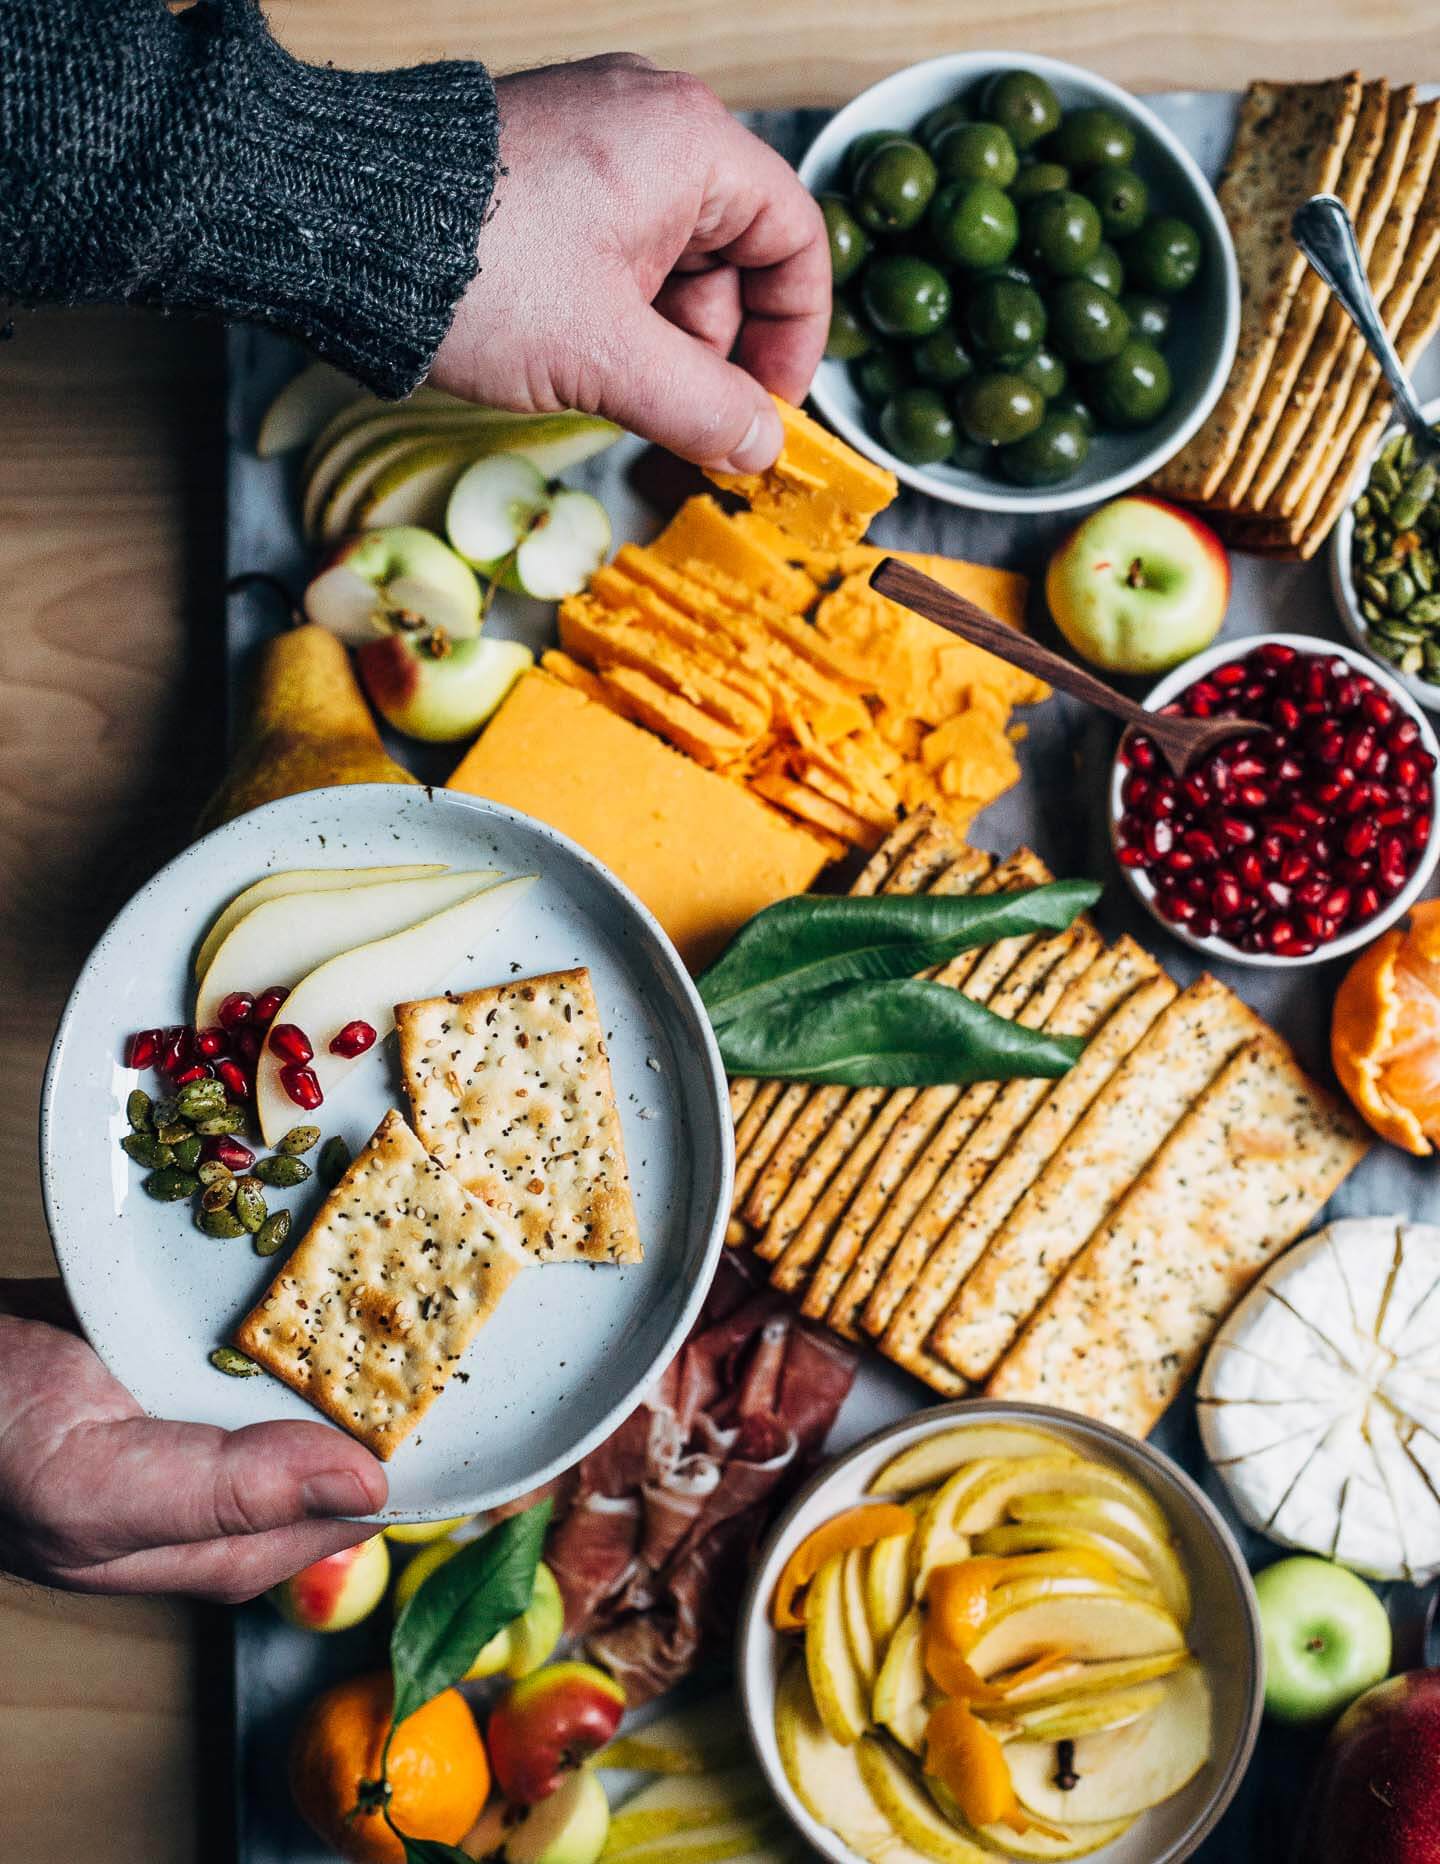 A modern holiday cheese board with red cheddar and brie-style cheeses, winter fruit, and sweet and sour quick-pickled apples.